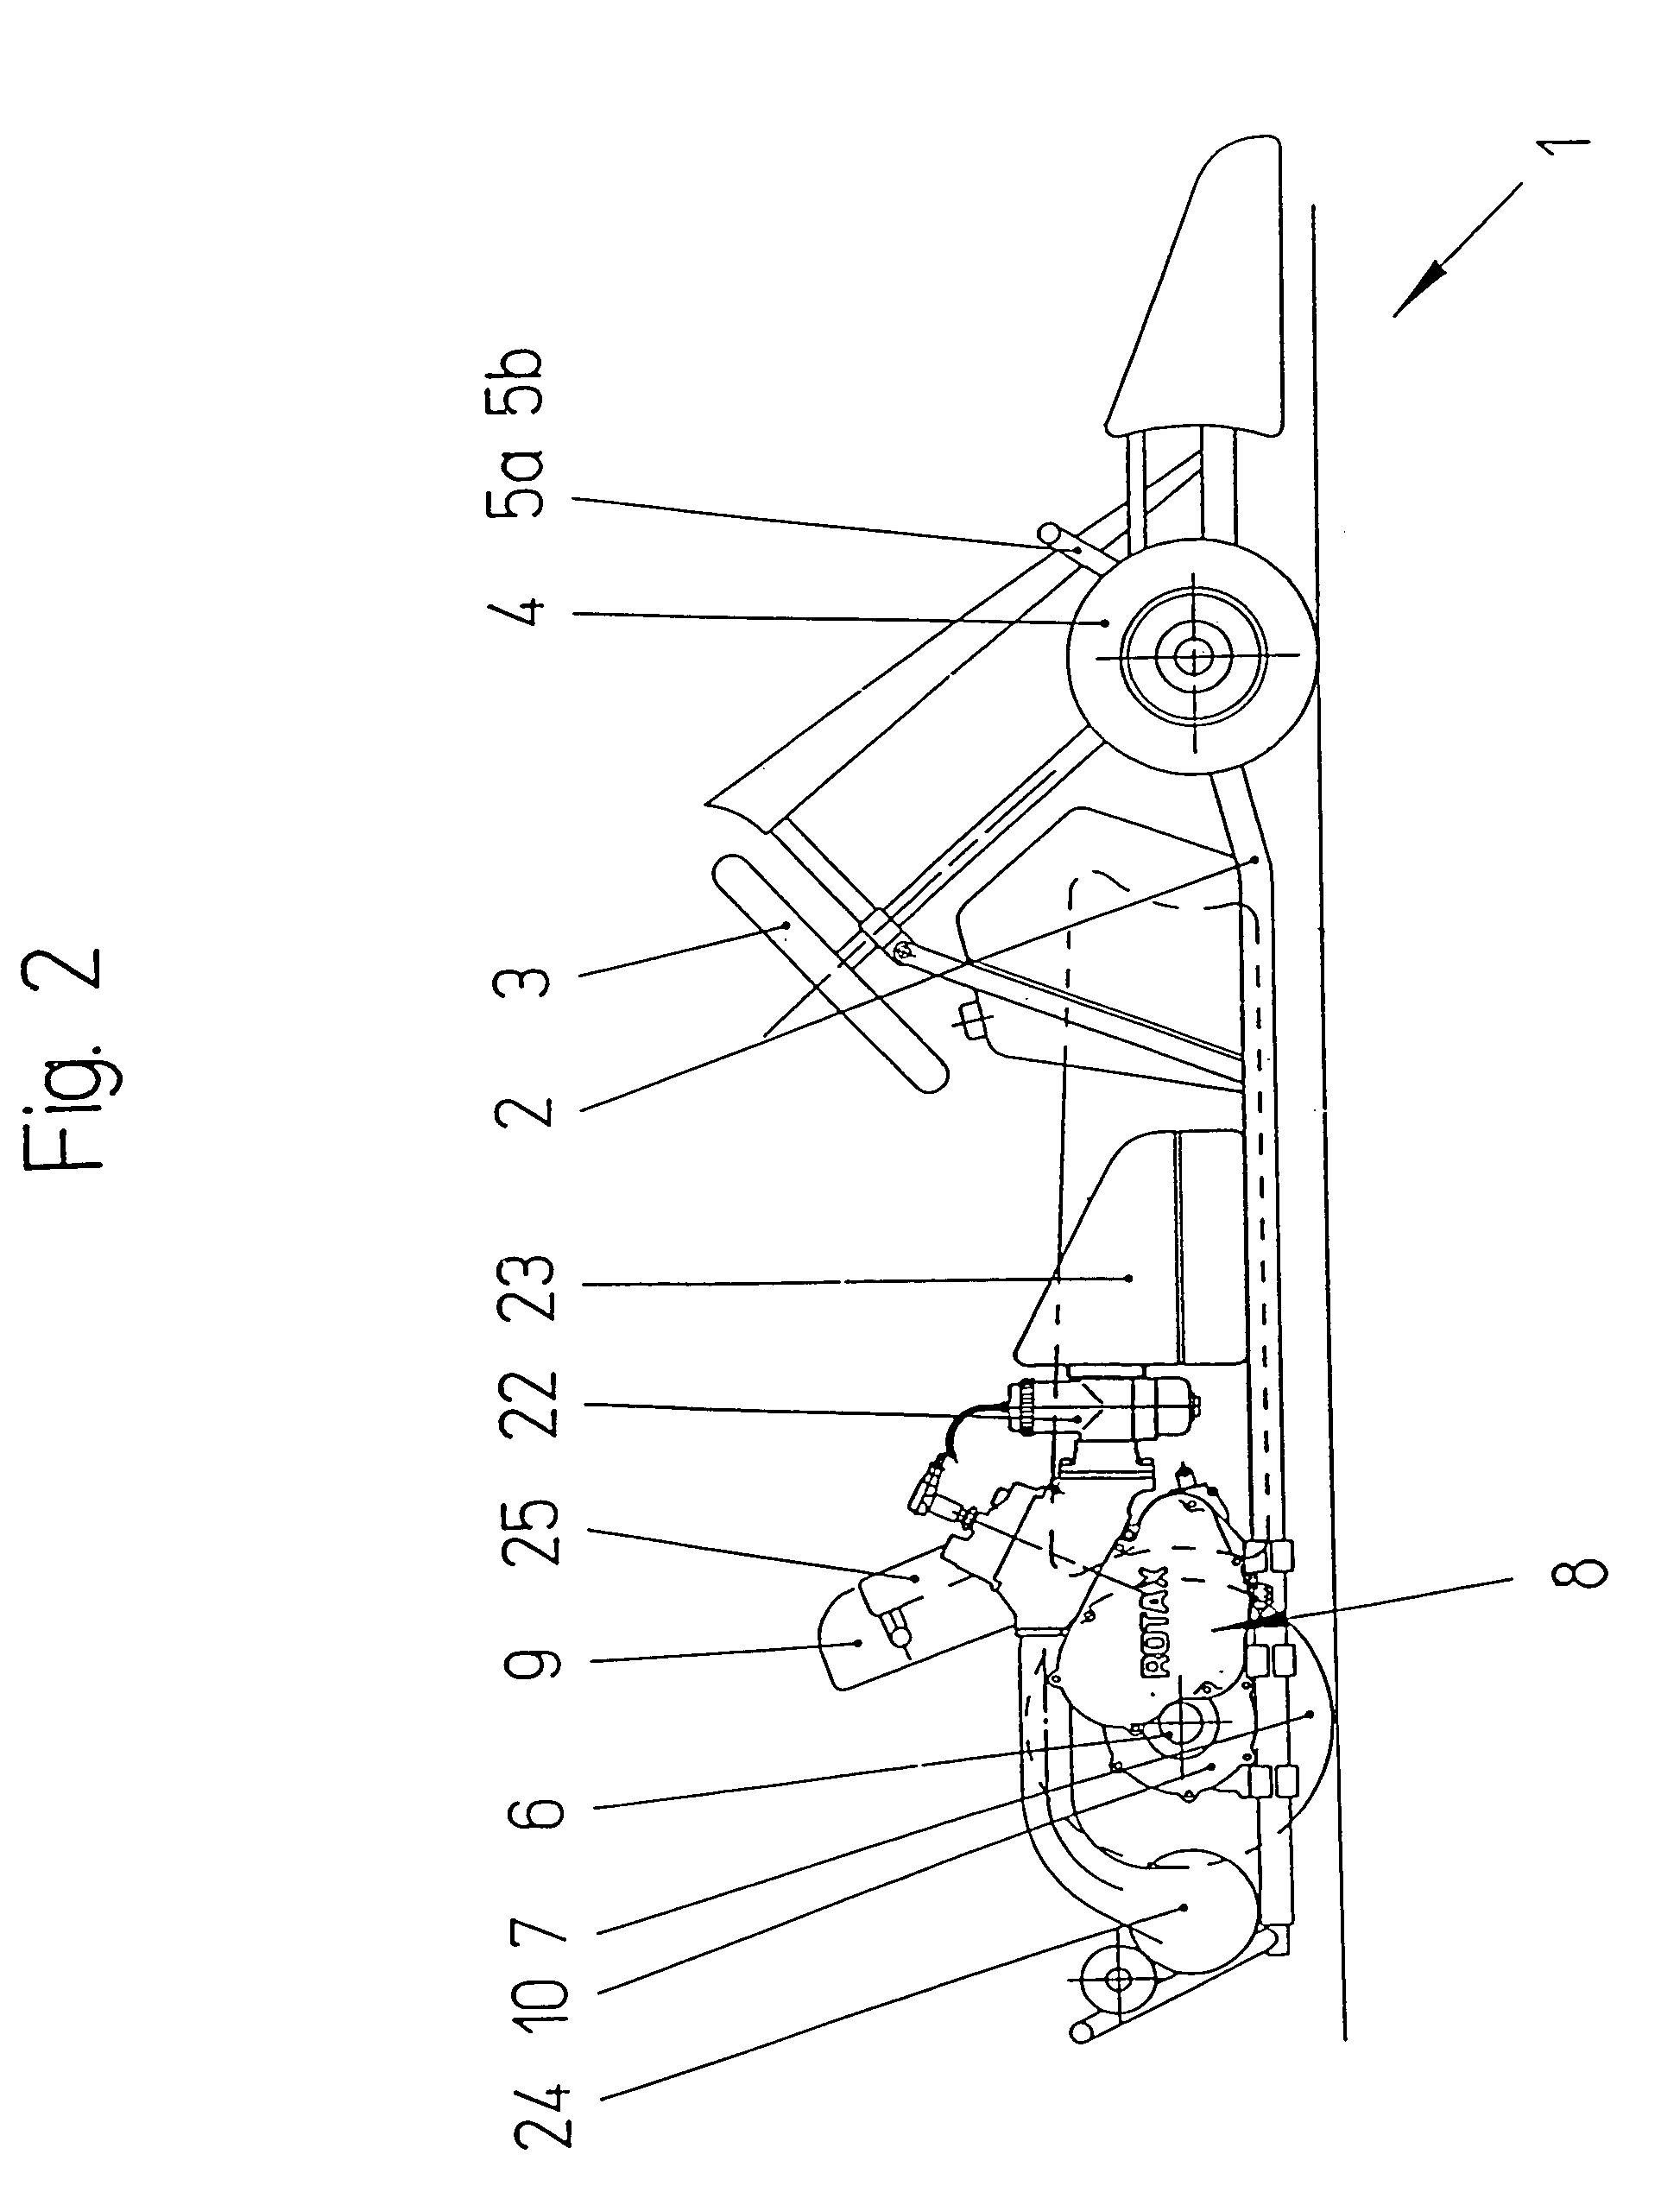 Direct drive assembly and go-kart containing same